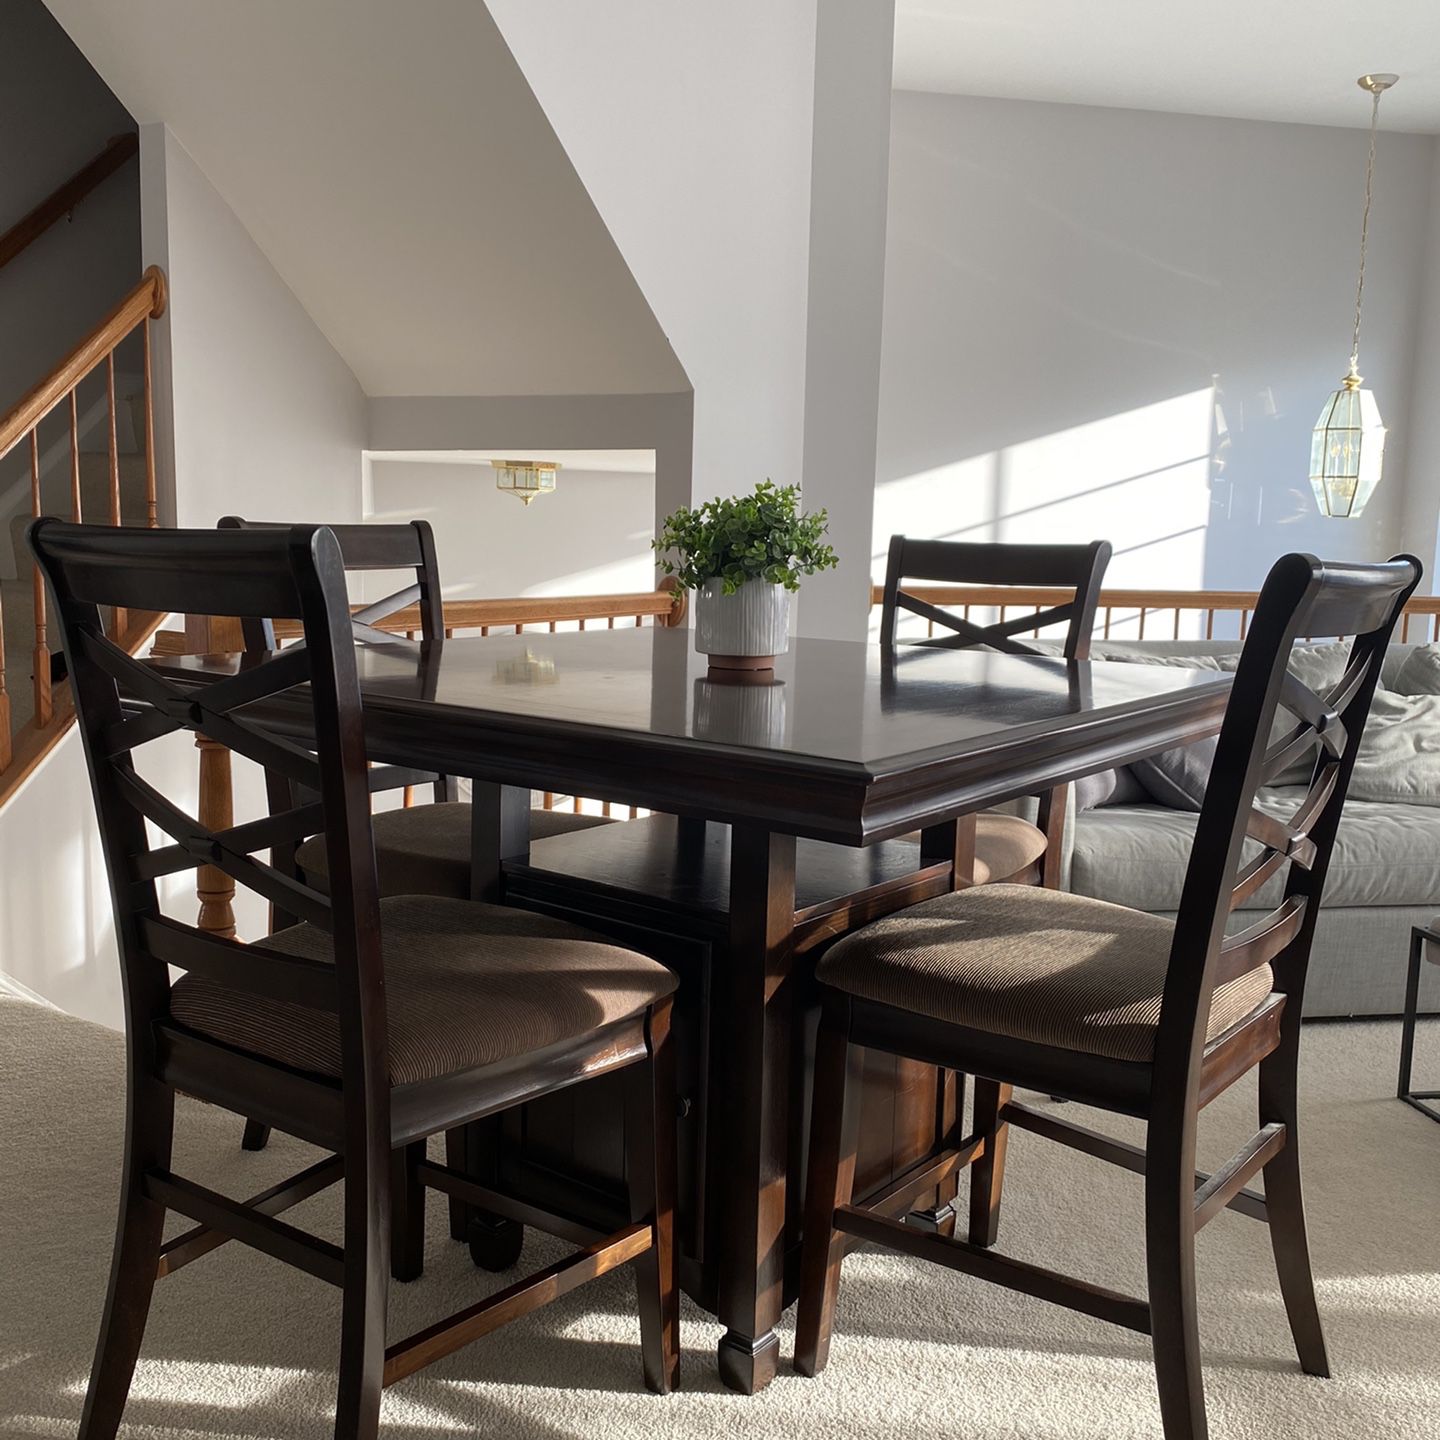 Dining room Table For Sale